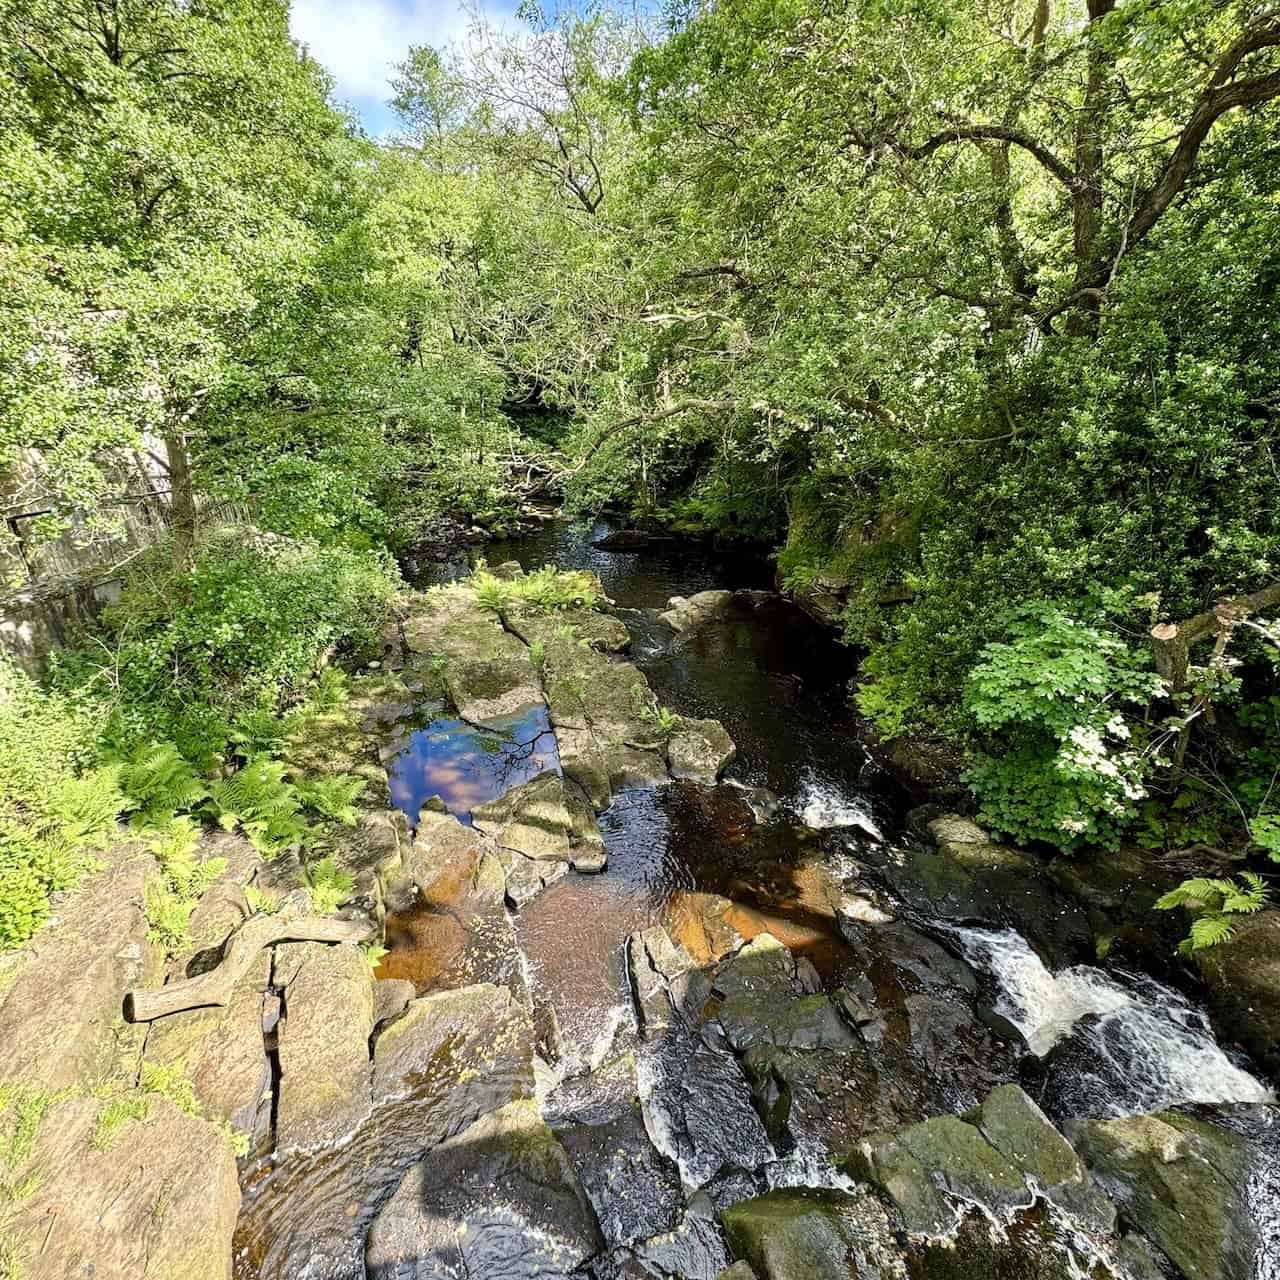 Eller Beck flowing beneath the bridge near Goathland Railway Station. Its source is on Allerston High Moor near RAF Fylingdales, about 4 miles (6.4 kilometres) to the south-east.
